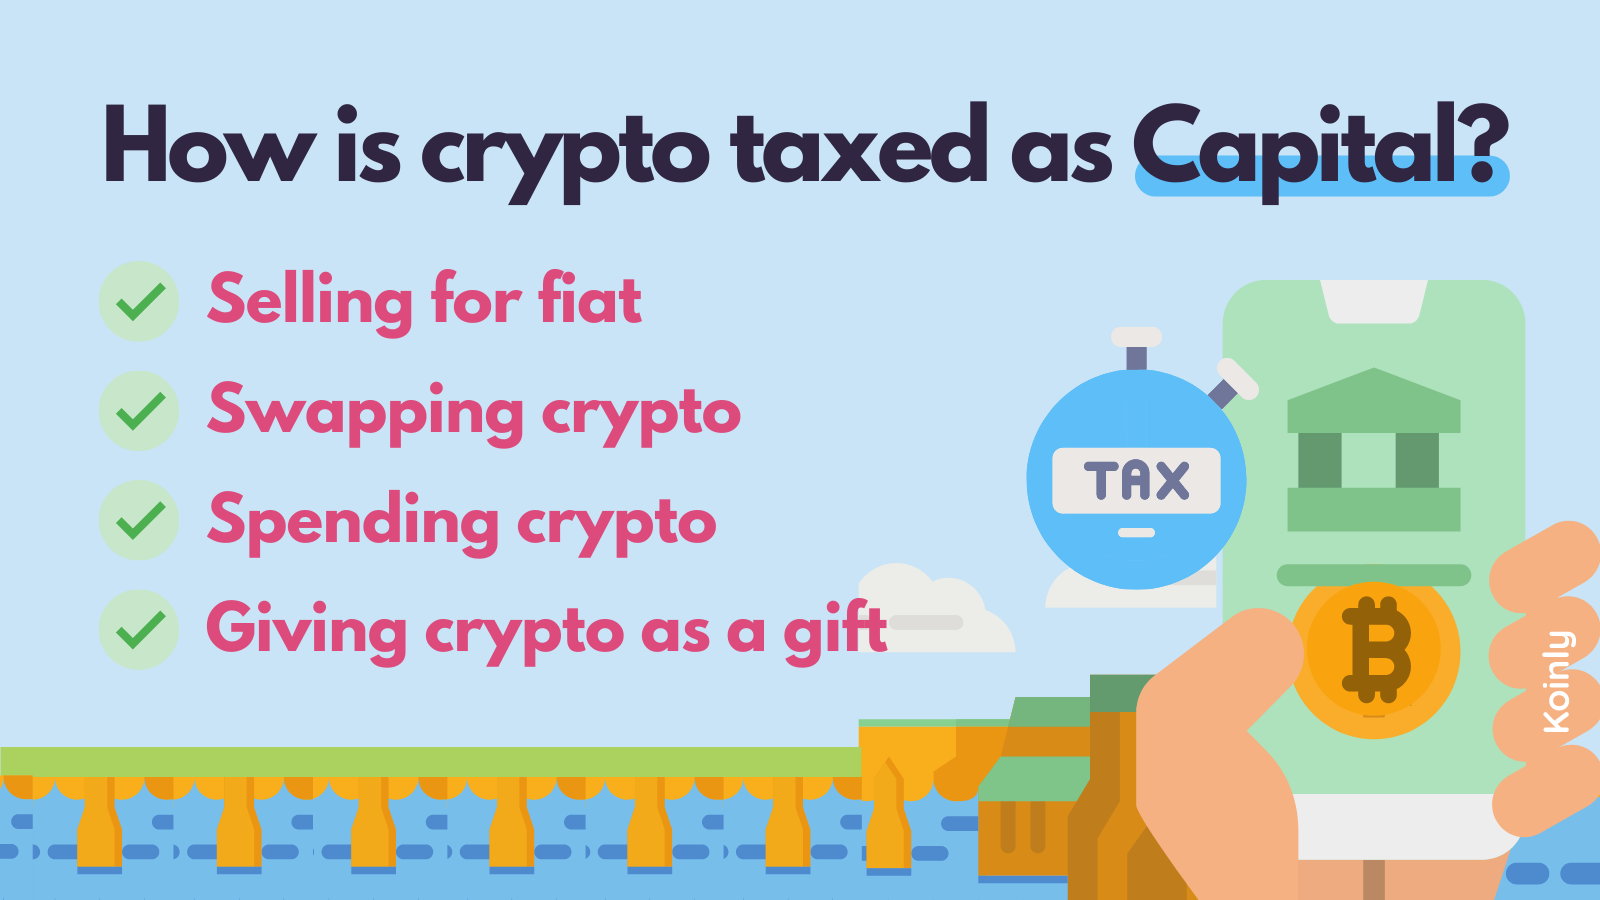 Cryptocurrency gains can be treated as capital gains tax